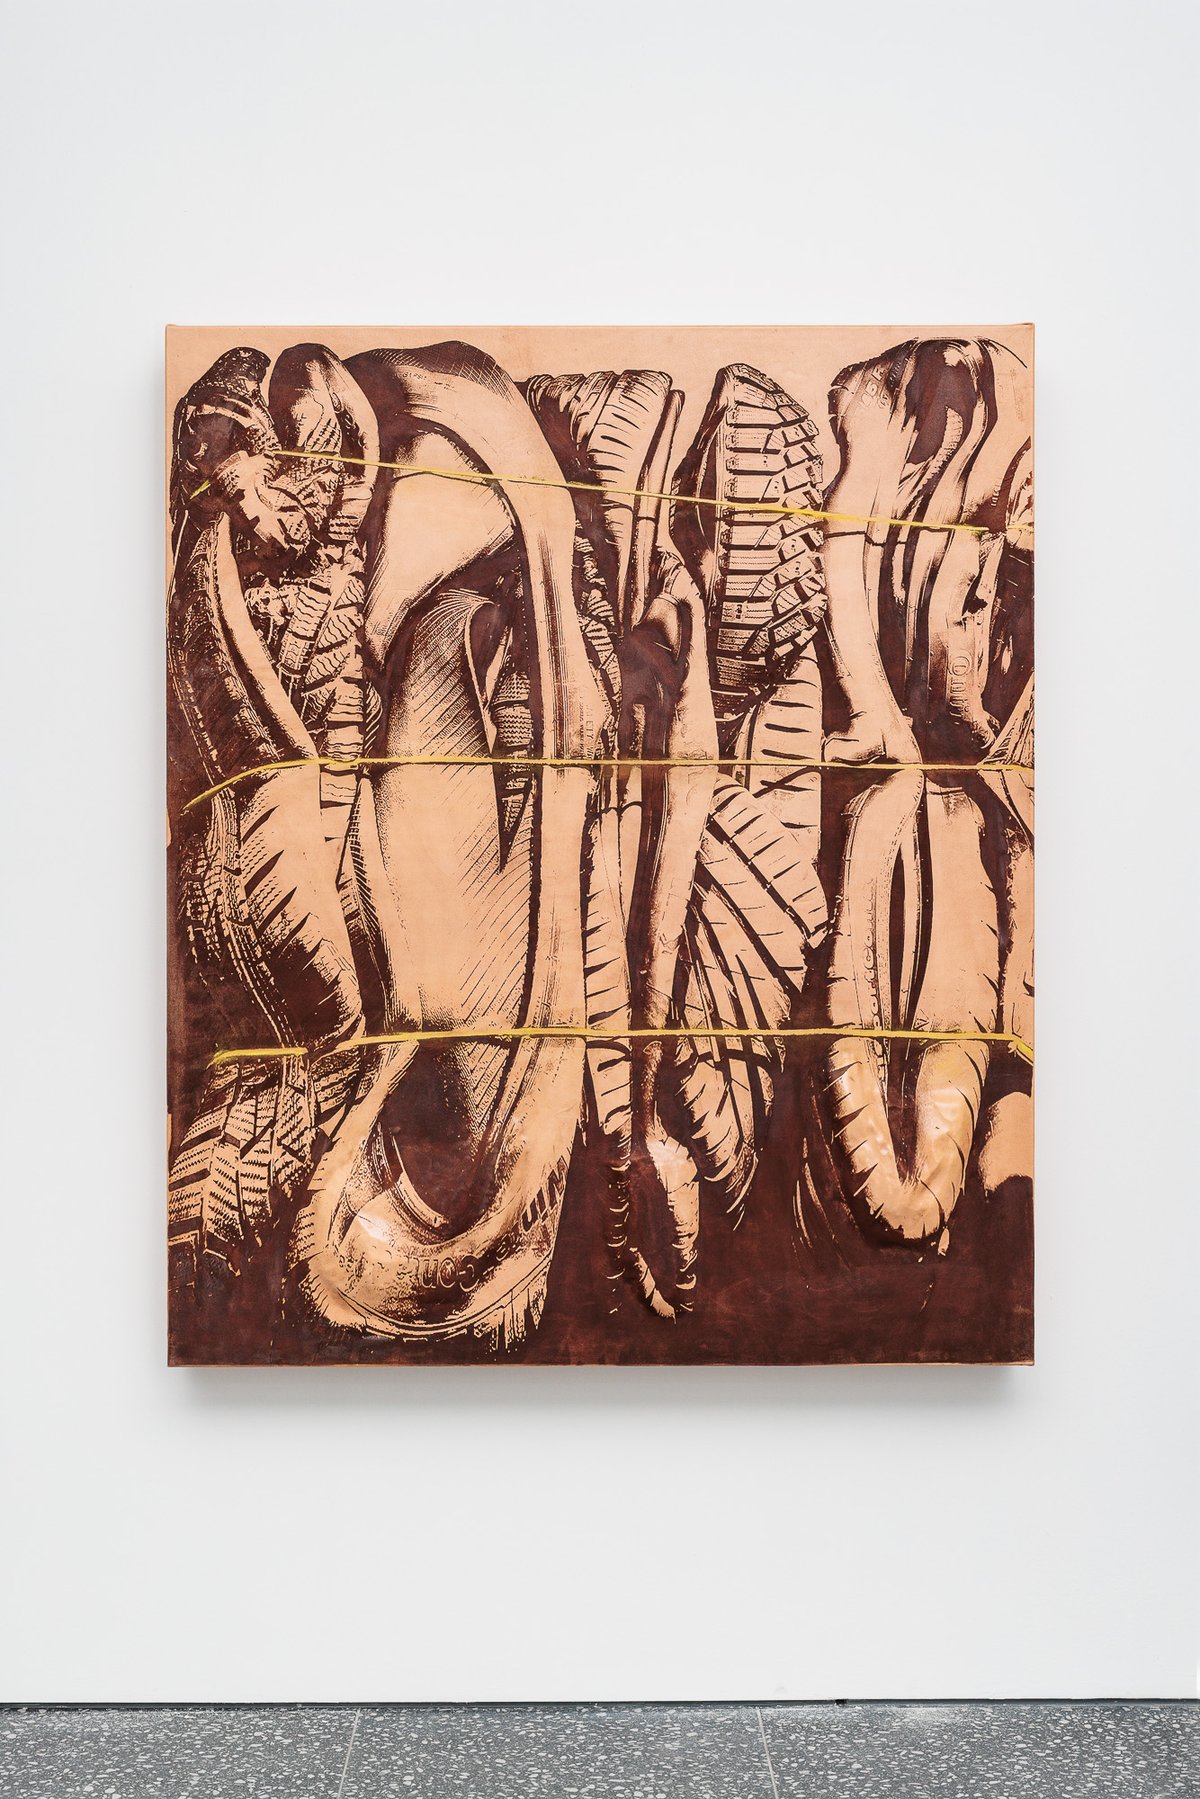 Lena HenkeLena Henke, Combustions 23 [Sidewall failure], 2024Laser etched leather, pigment on wooden panel150 x 125 x 15 cm